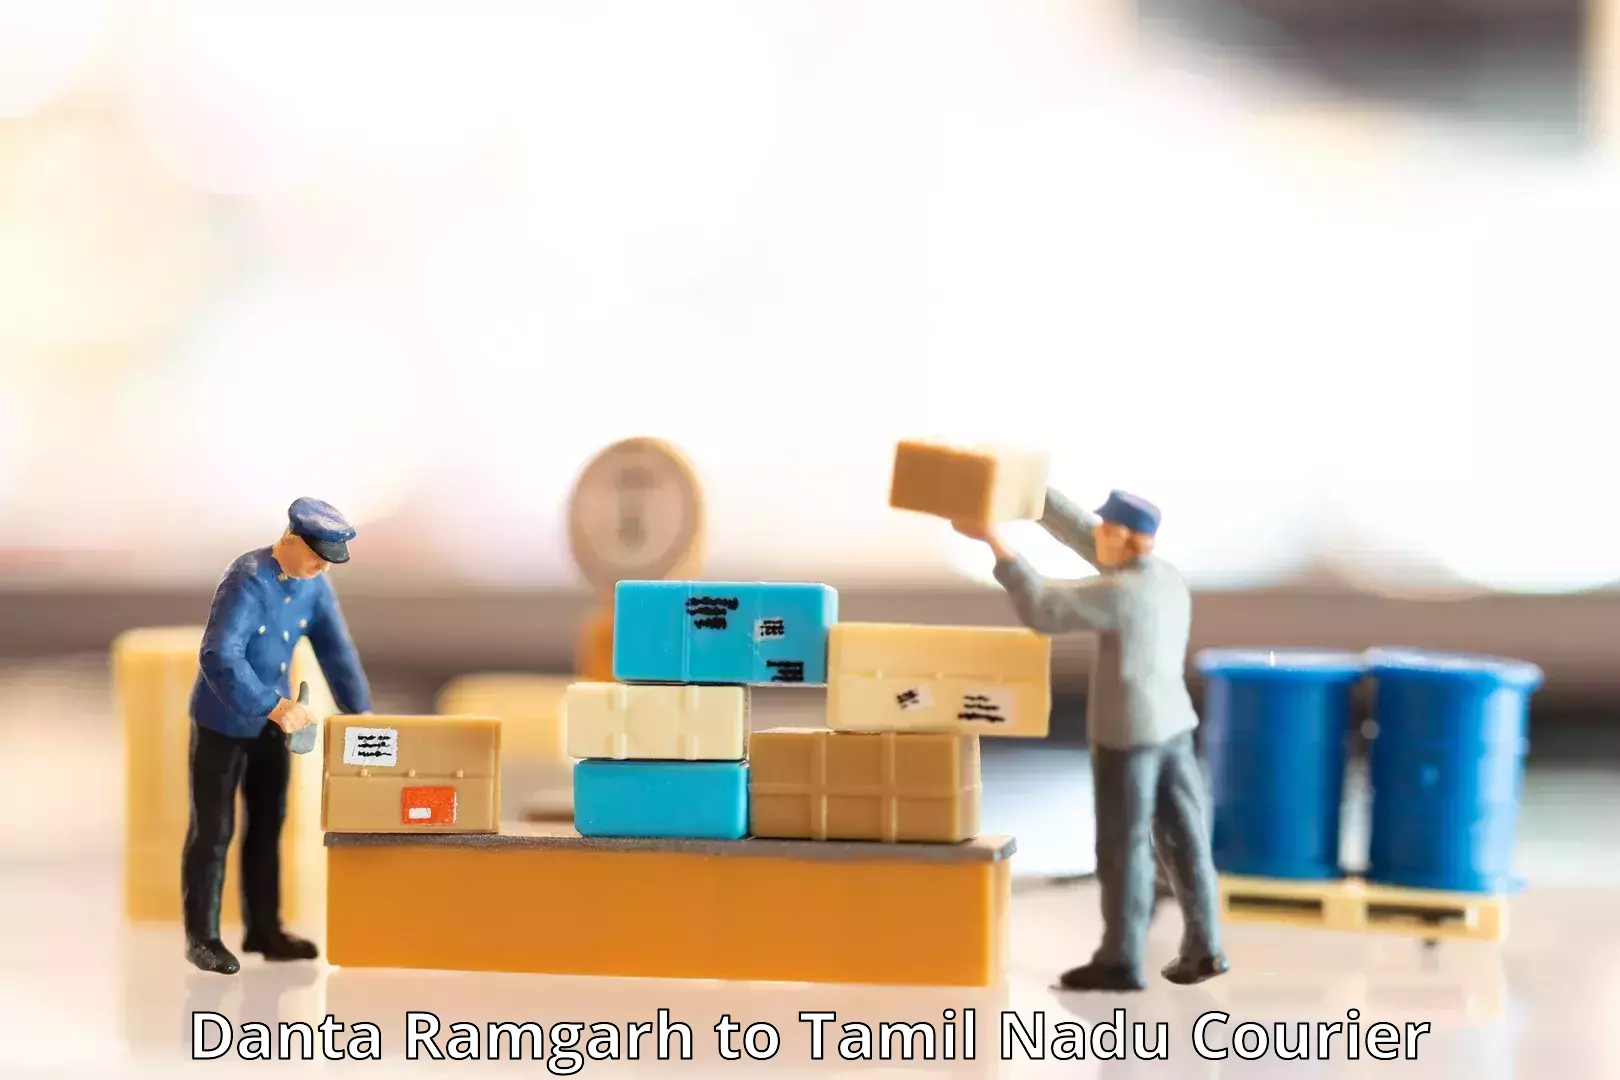 State-of-the-art courier technology in Danta Ramgarh to Manamadurai